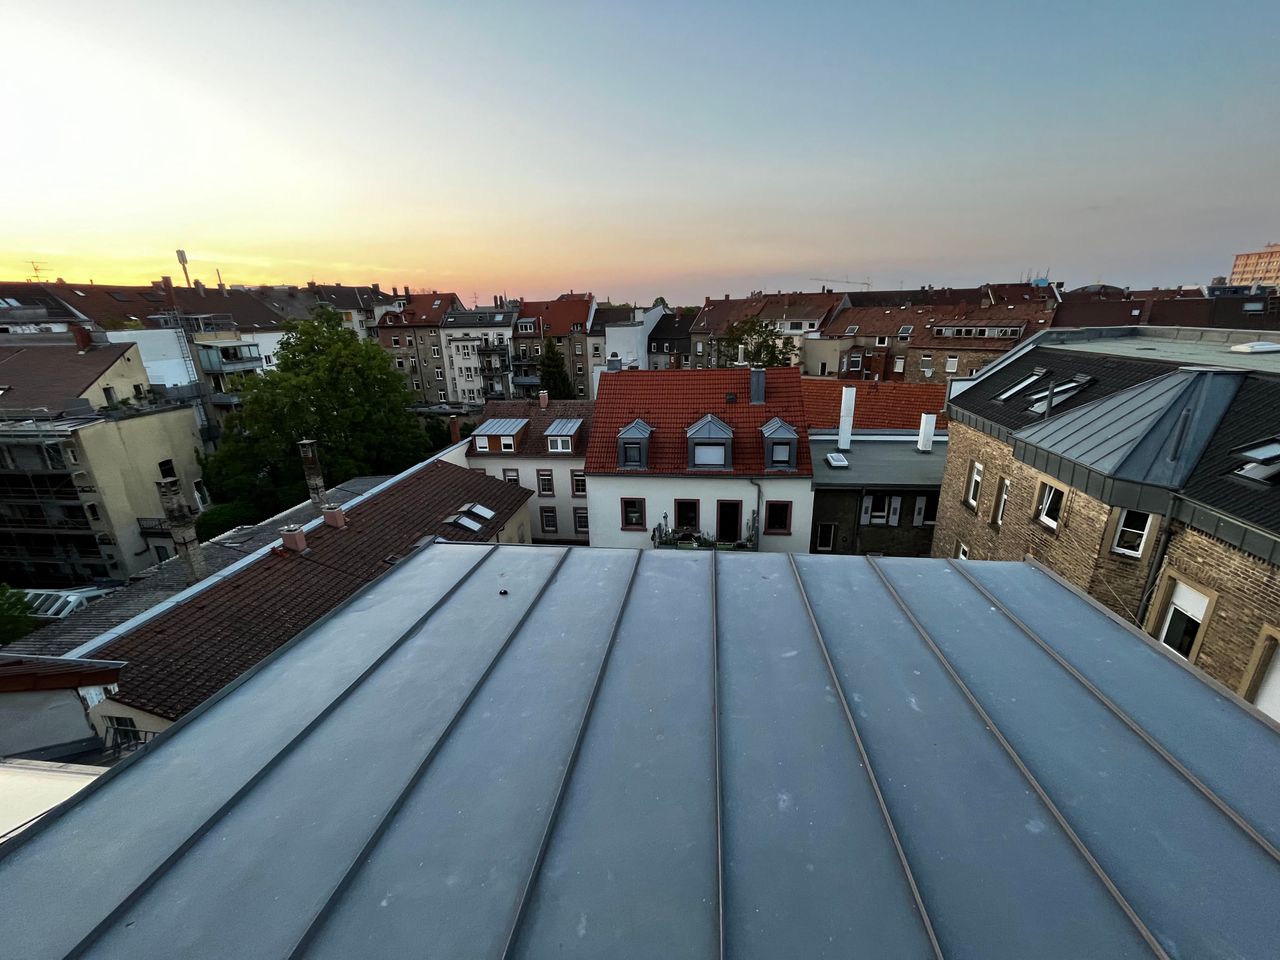 Spacious apartment over the roofs of Karlsruhe